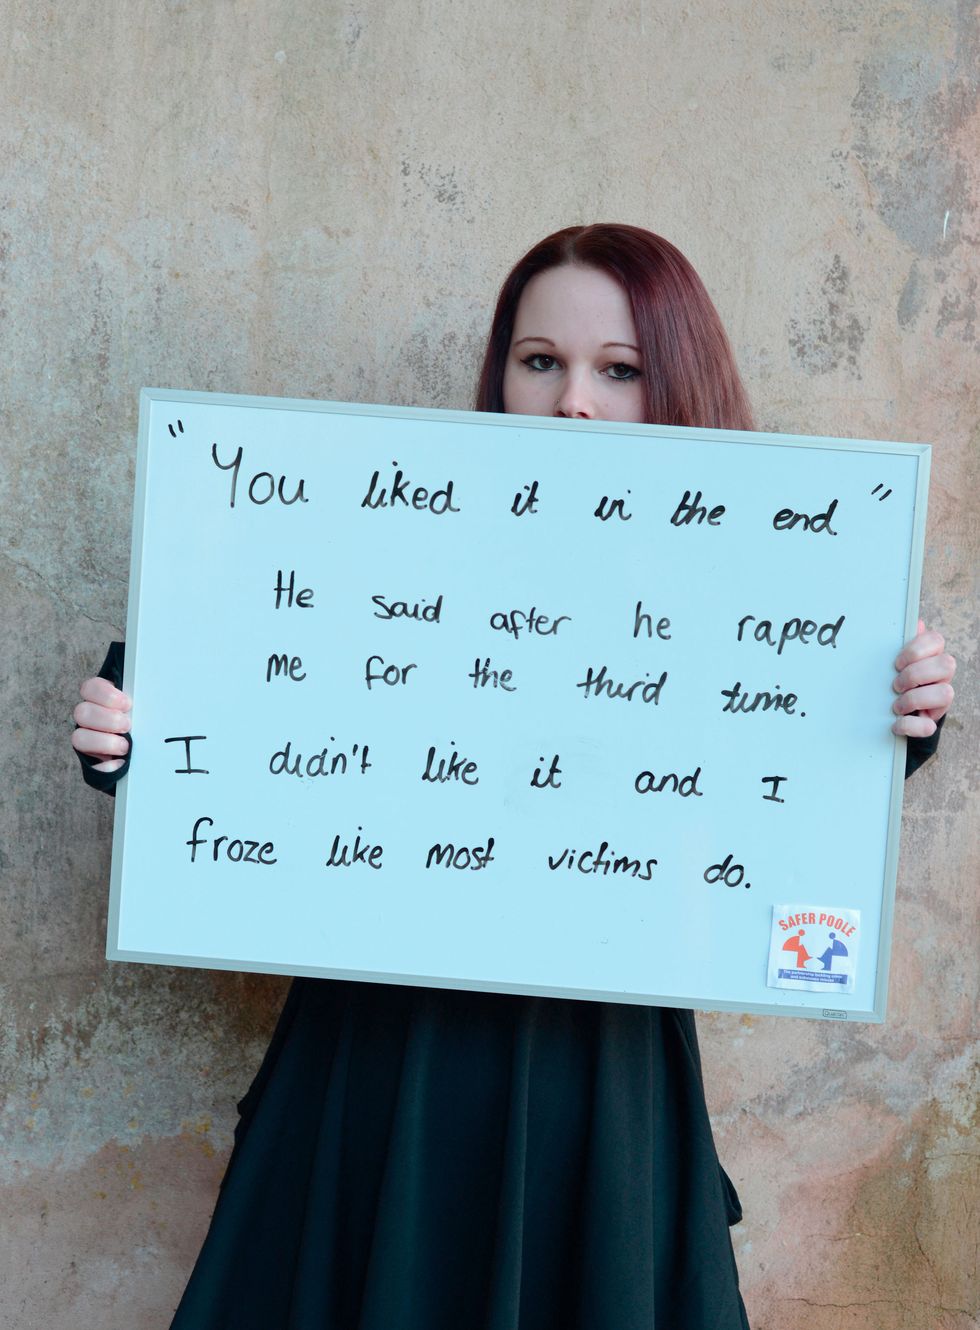 One sexual violence survivor explains why we need to break down the stigma around the issue